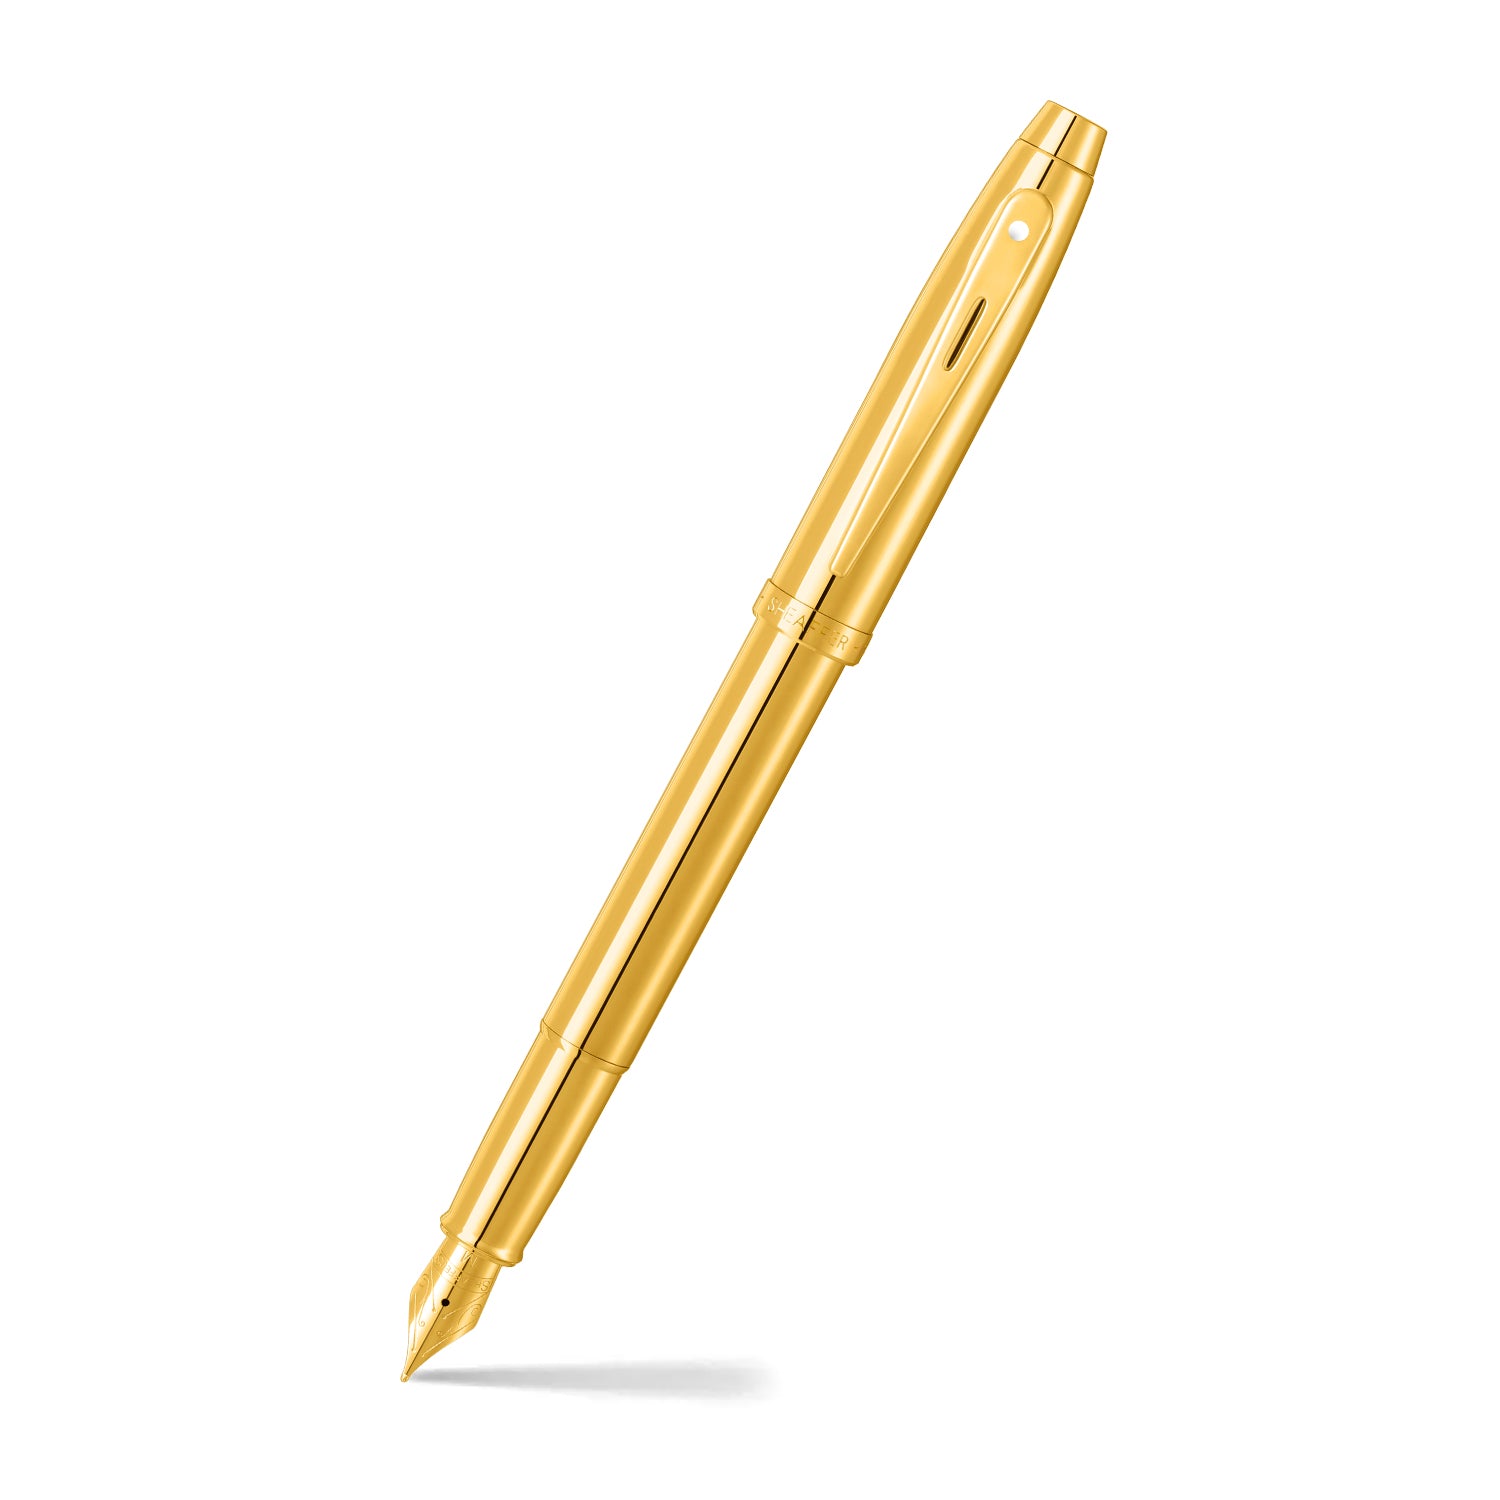 Sheaffer® 100 9372 Glossy PVD Gold Fountain Pen With PVD Gold Trim - Medium